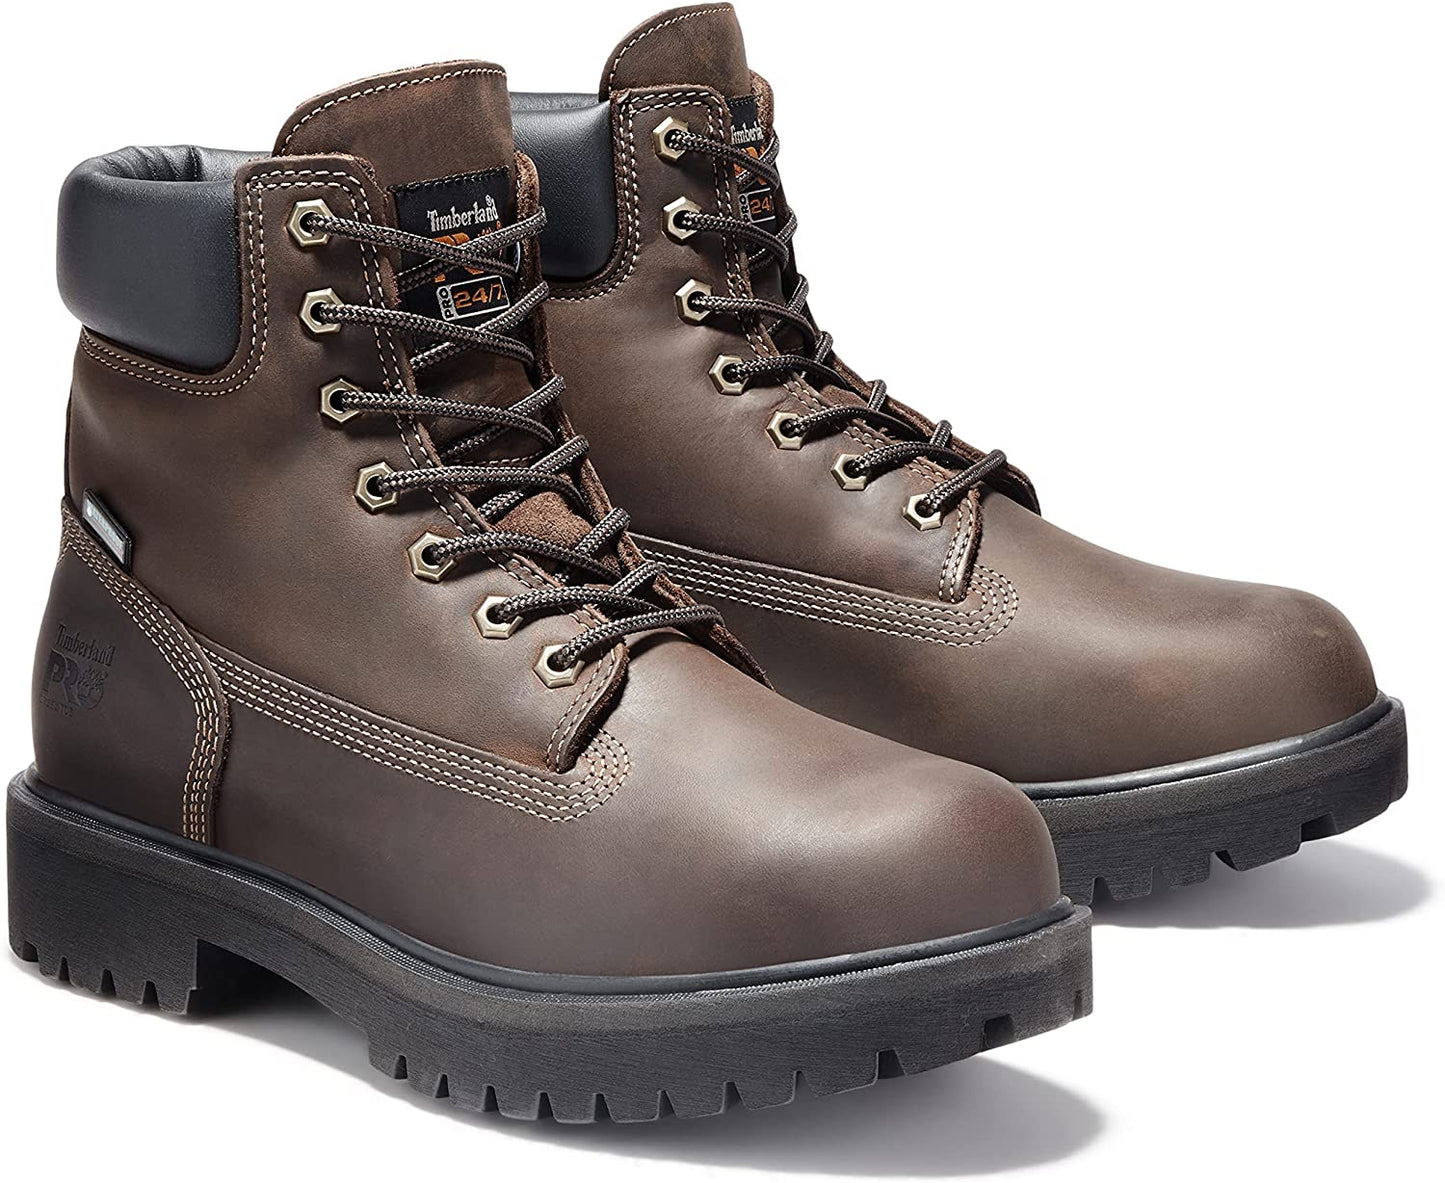 Timberland PRO Men's Direct Attach 6" Steel Safety Toe Waterproof Boot  Color Brown Size 11.5M